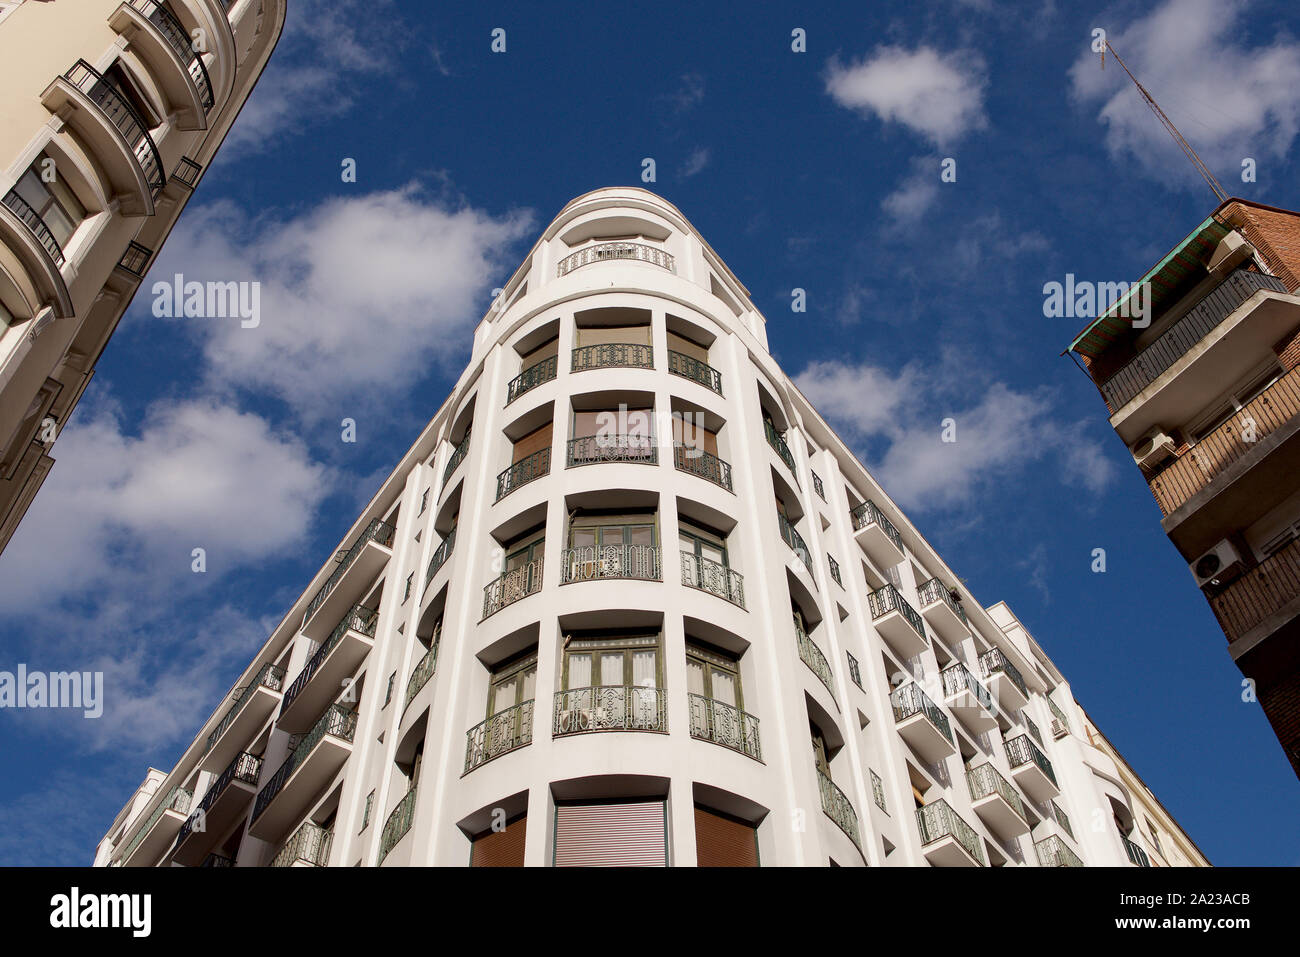 Curved building in Madrid, Spain Stock Photo